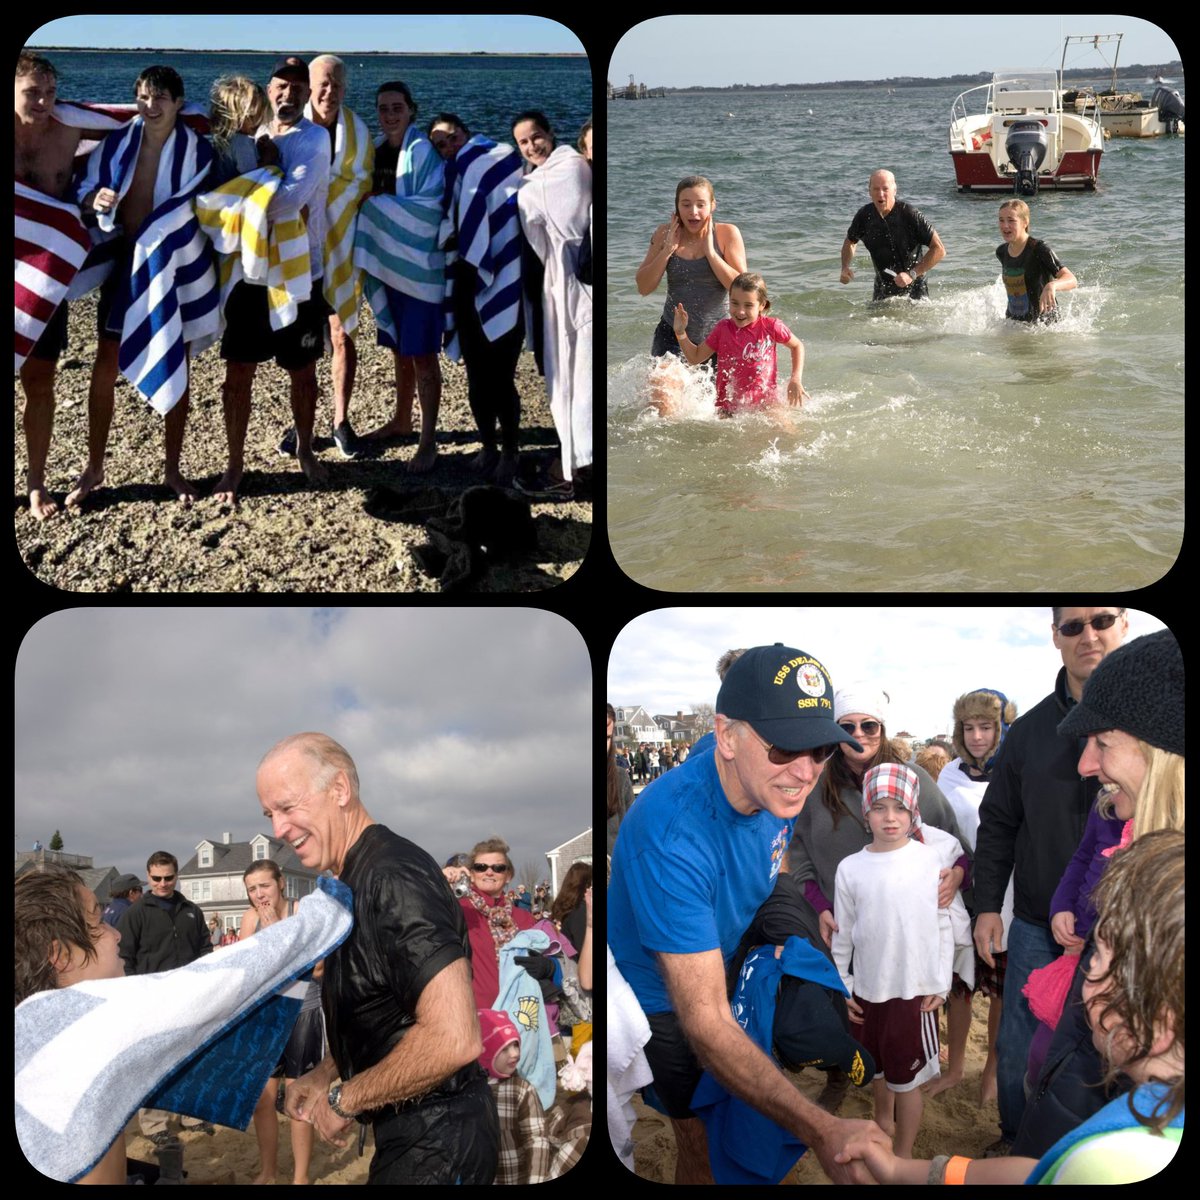 📸 President Biden famously works out, lifts weights, and rides a bike to stay healthy. And yesterday, as part of a long-running family tradition, he plunged into 40-degree water as part of a polar plunge. Yet, the media wants you to worry about his health instead of the…